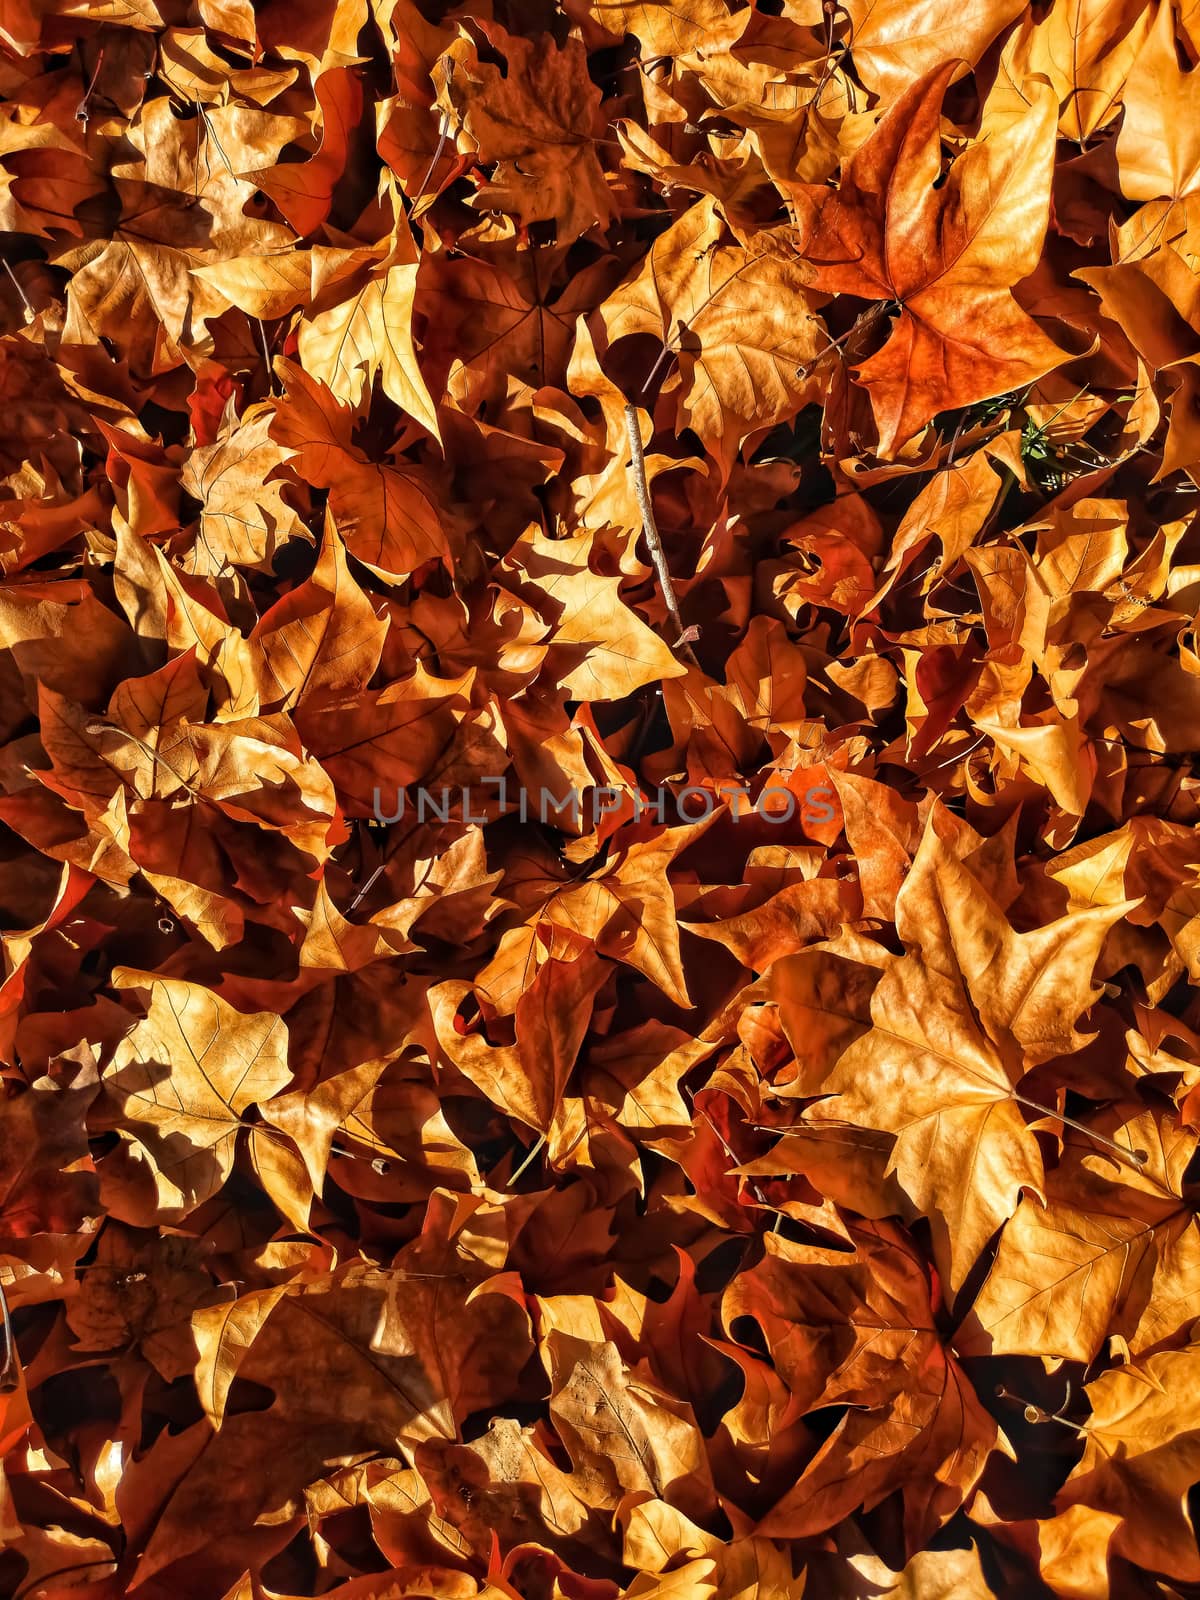 Dry leaves by Barriolo82